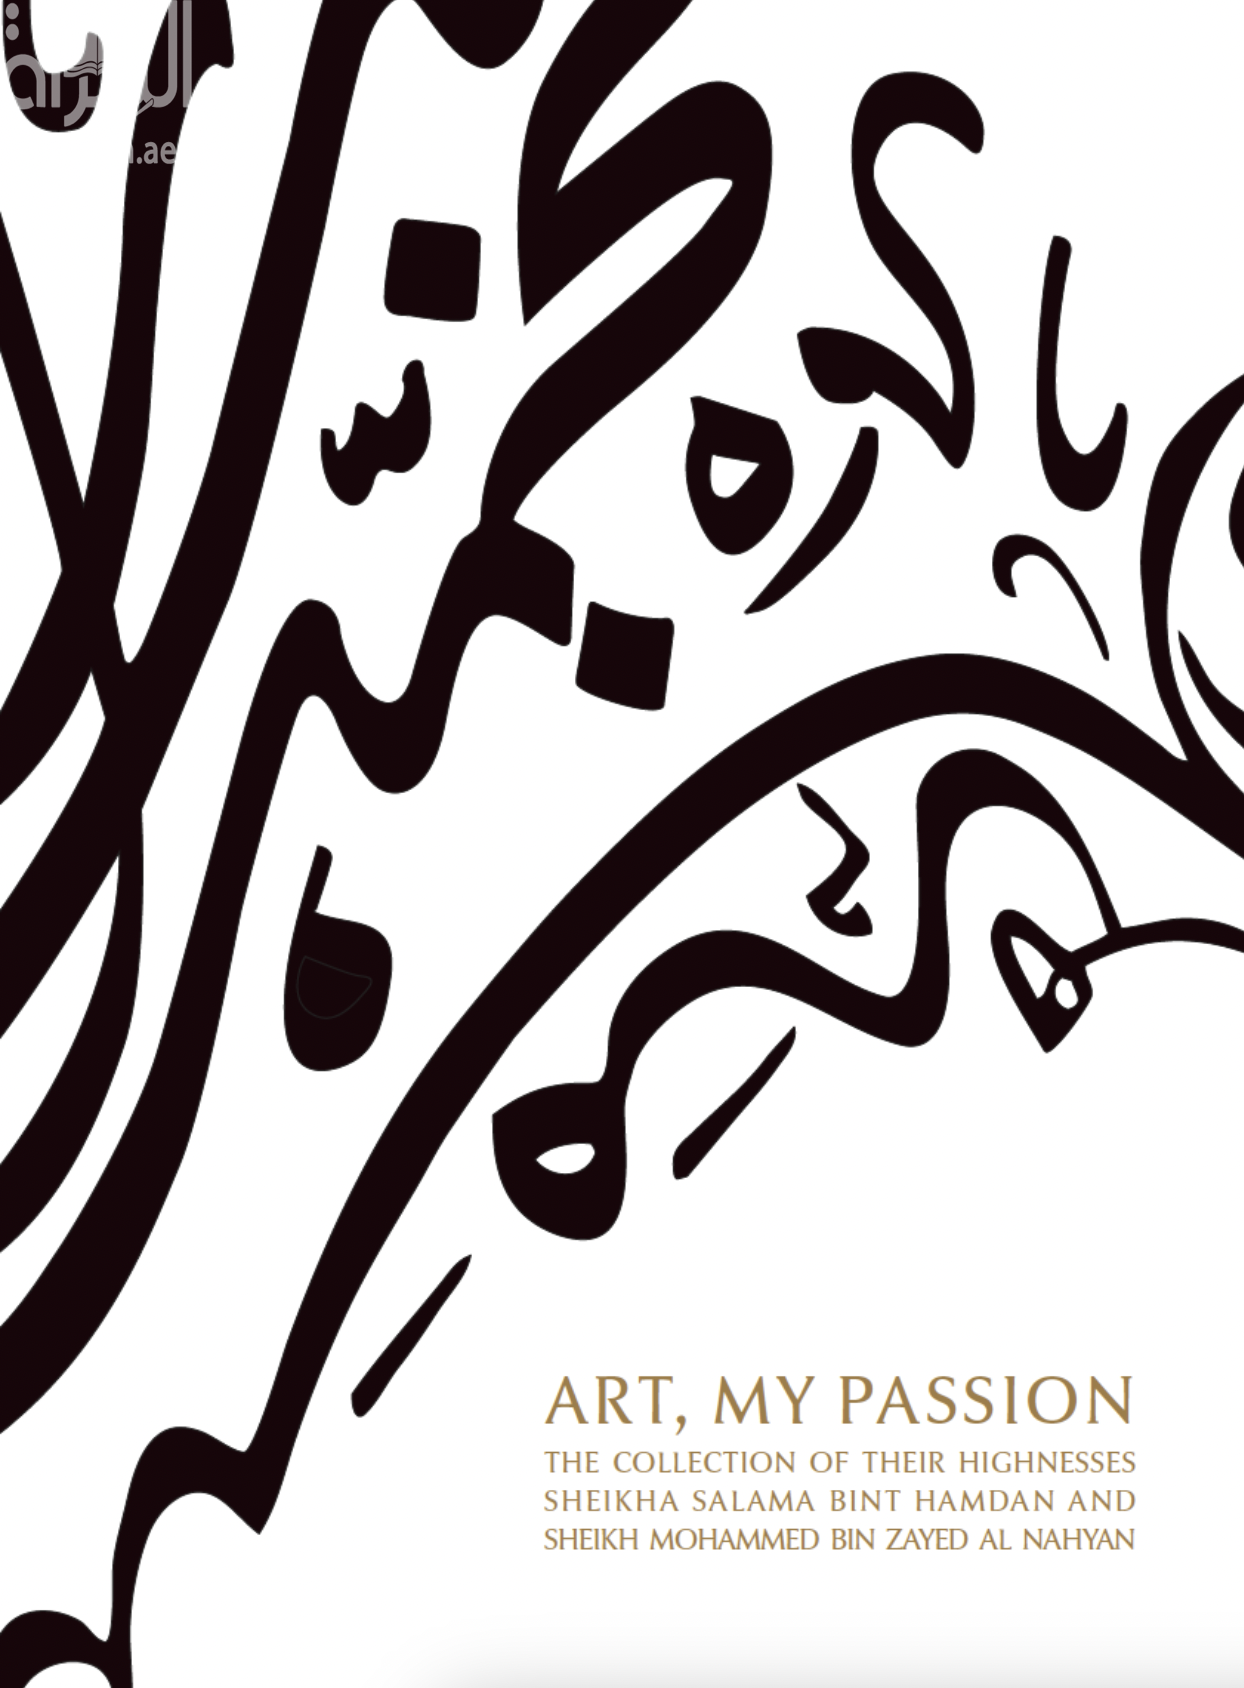 Art: My Passion, the Collection of Their Highnesses Sheikh Mohammed Bin Zayed Al Nahyan and Sheikha Salama Bint Hamdan Al Nahyan